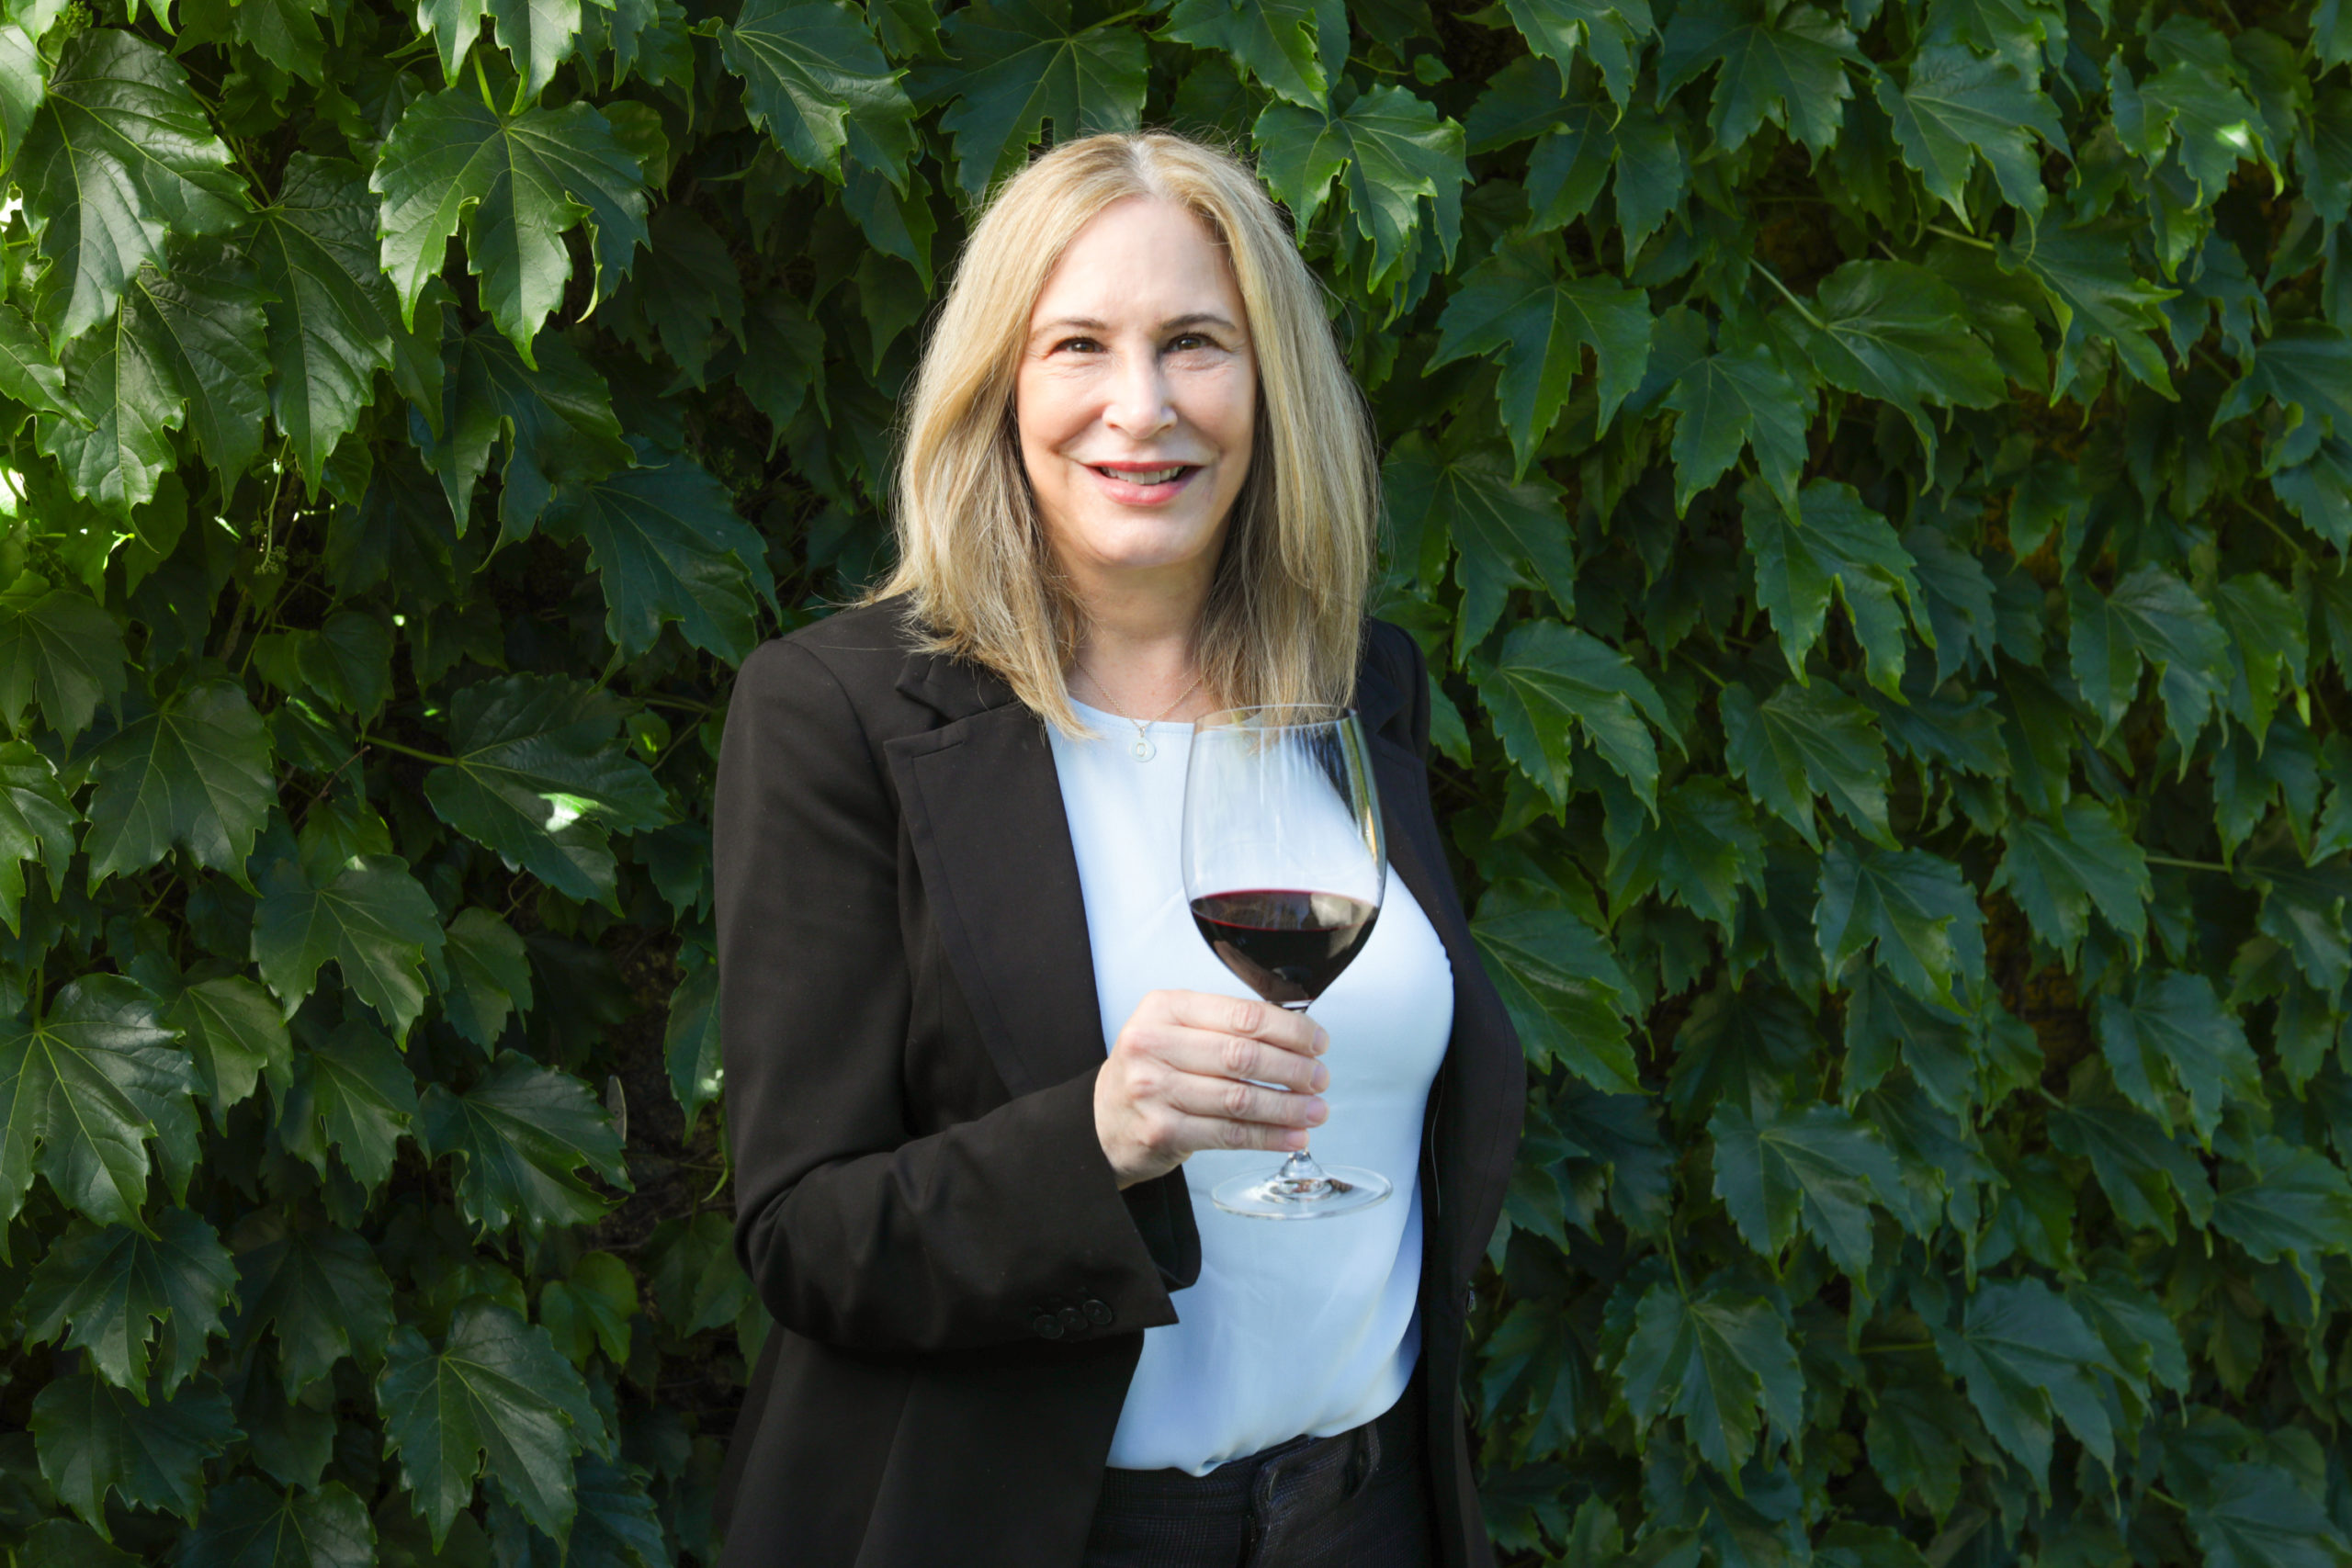 woman dressed in business attire with a glass of cabernet